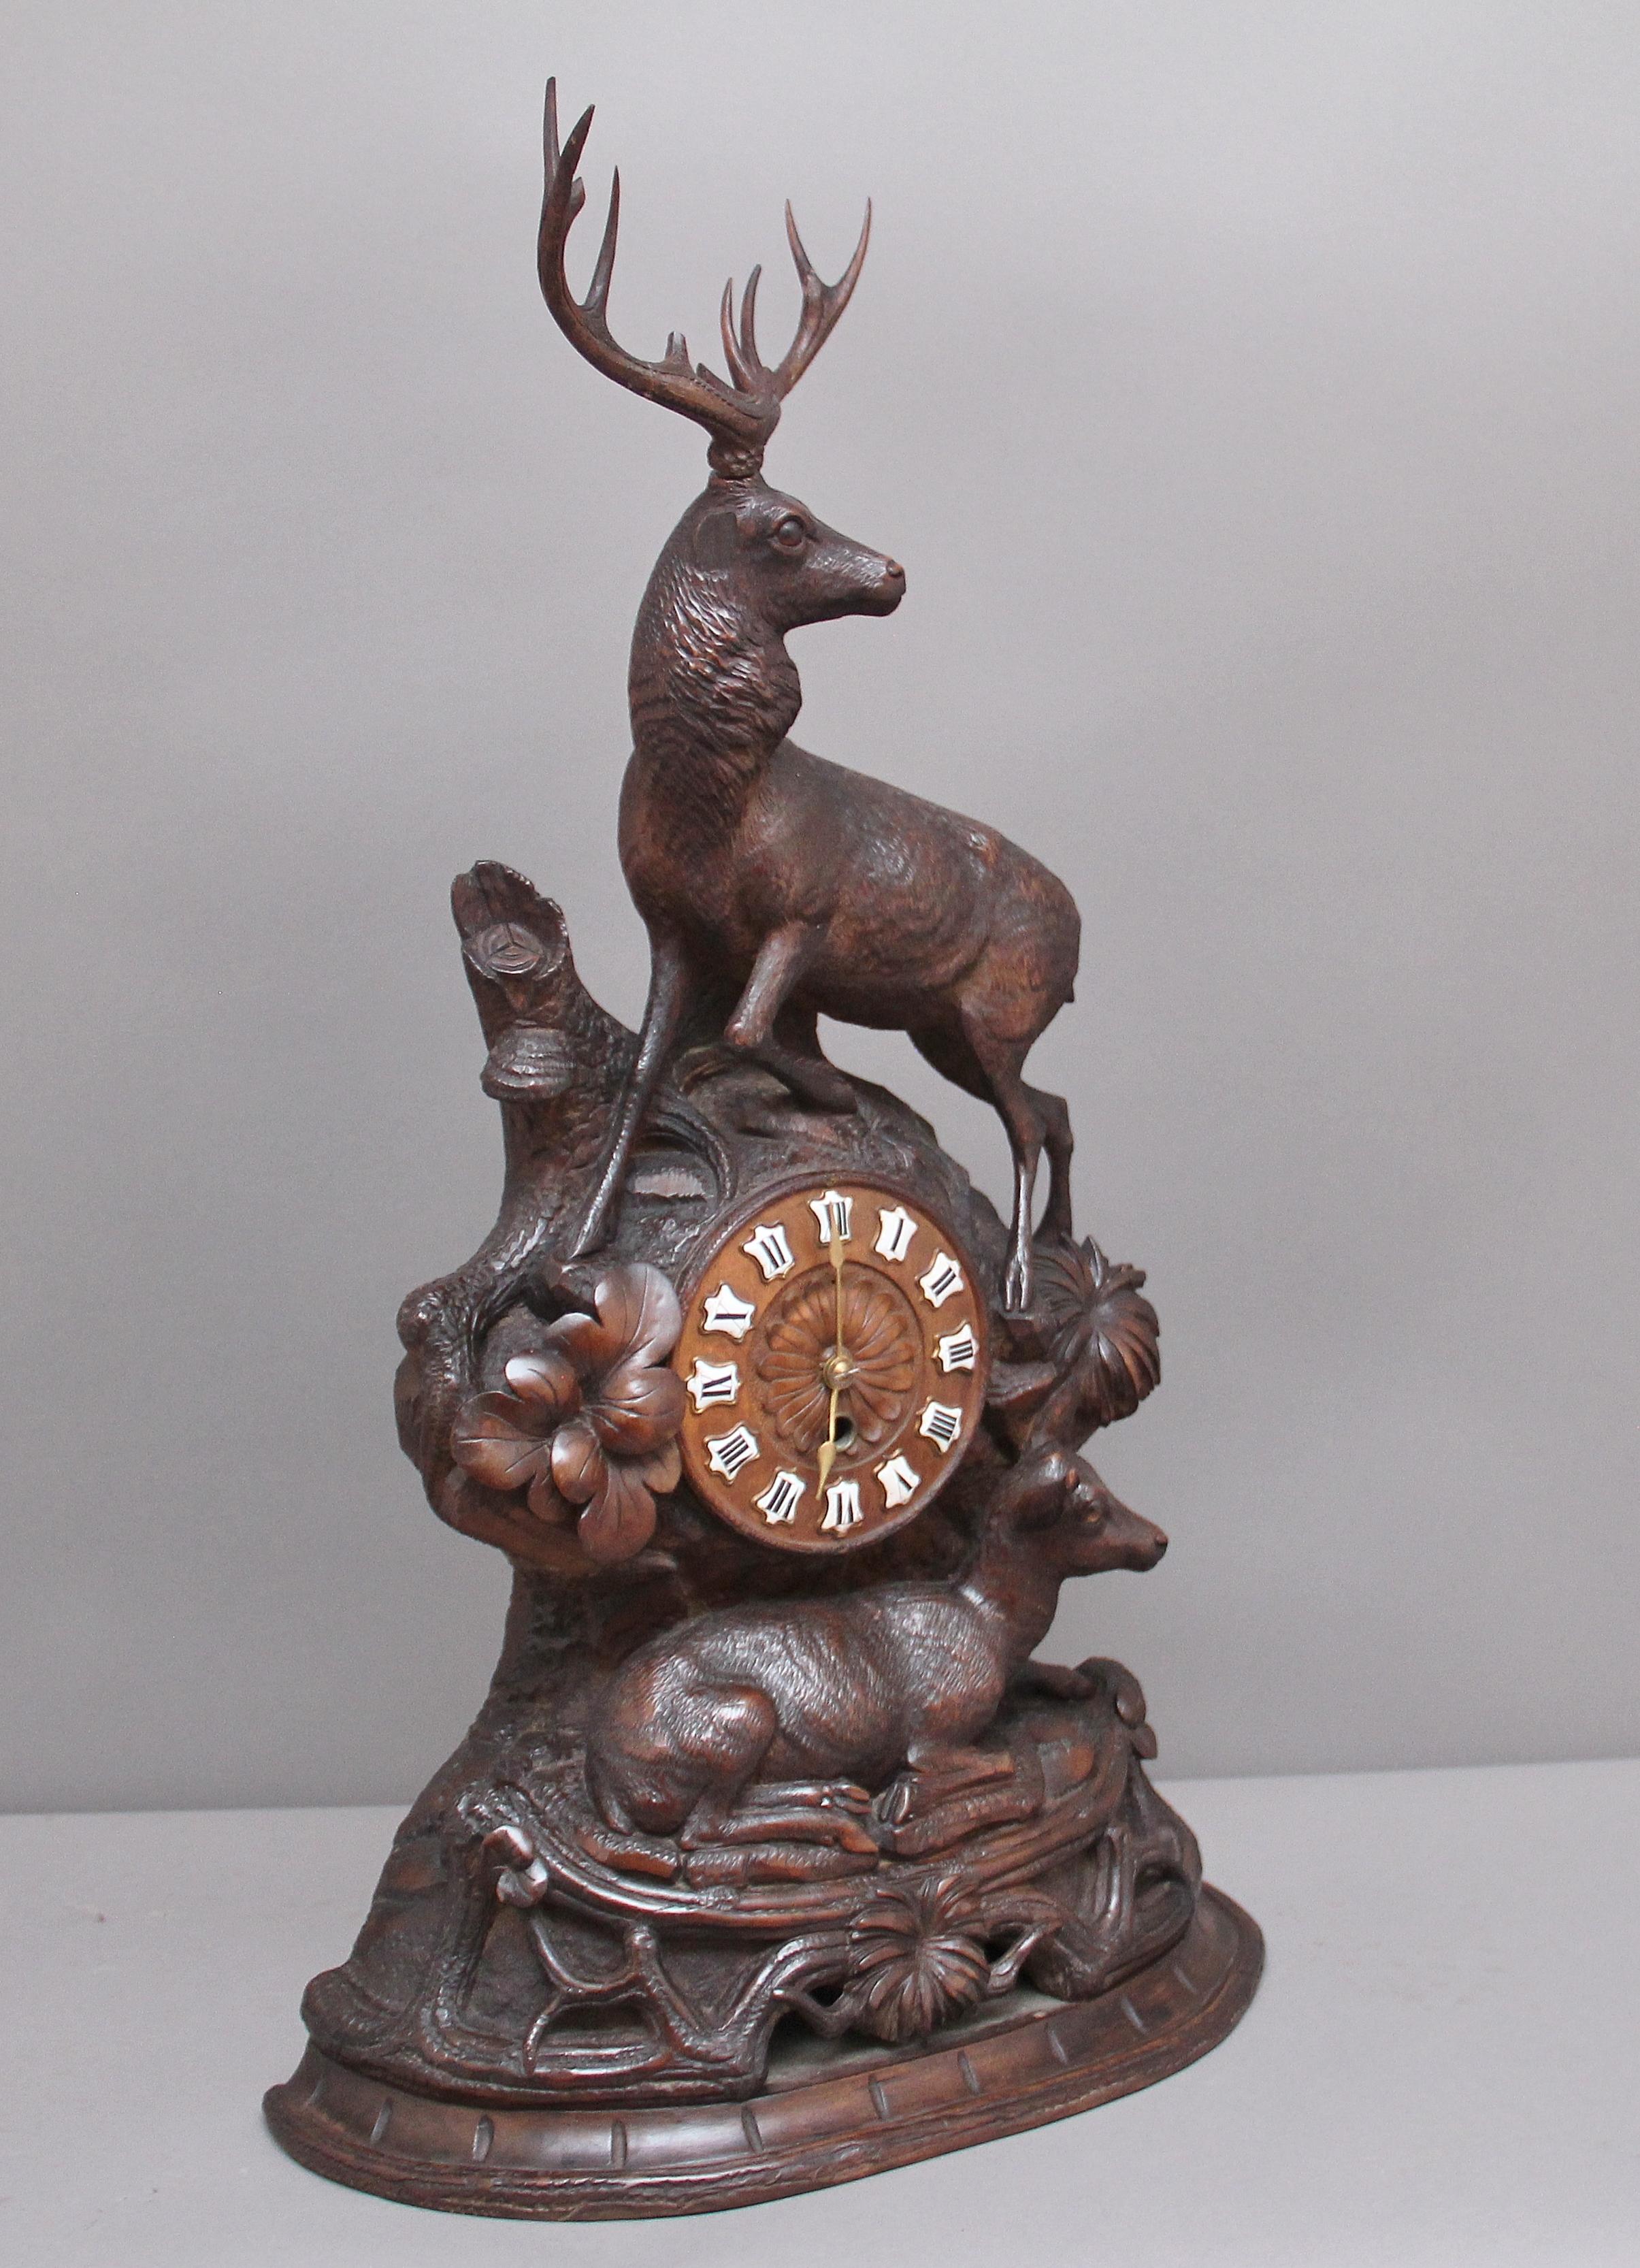 A superb quality 19th century walnut black forest mantle clock, the clock dial located at the centre within a rock face surrounded by various foliage with a hind below and stag above. Lovely crisp carving and in excellent condition, the movement has